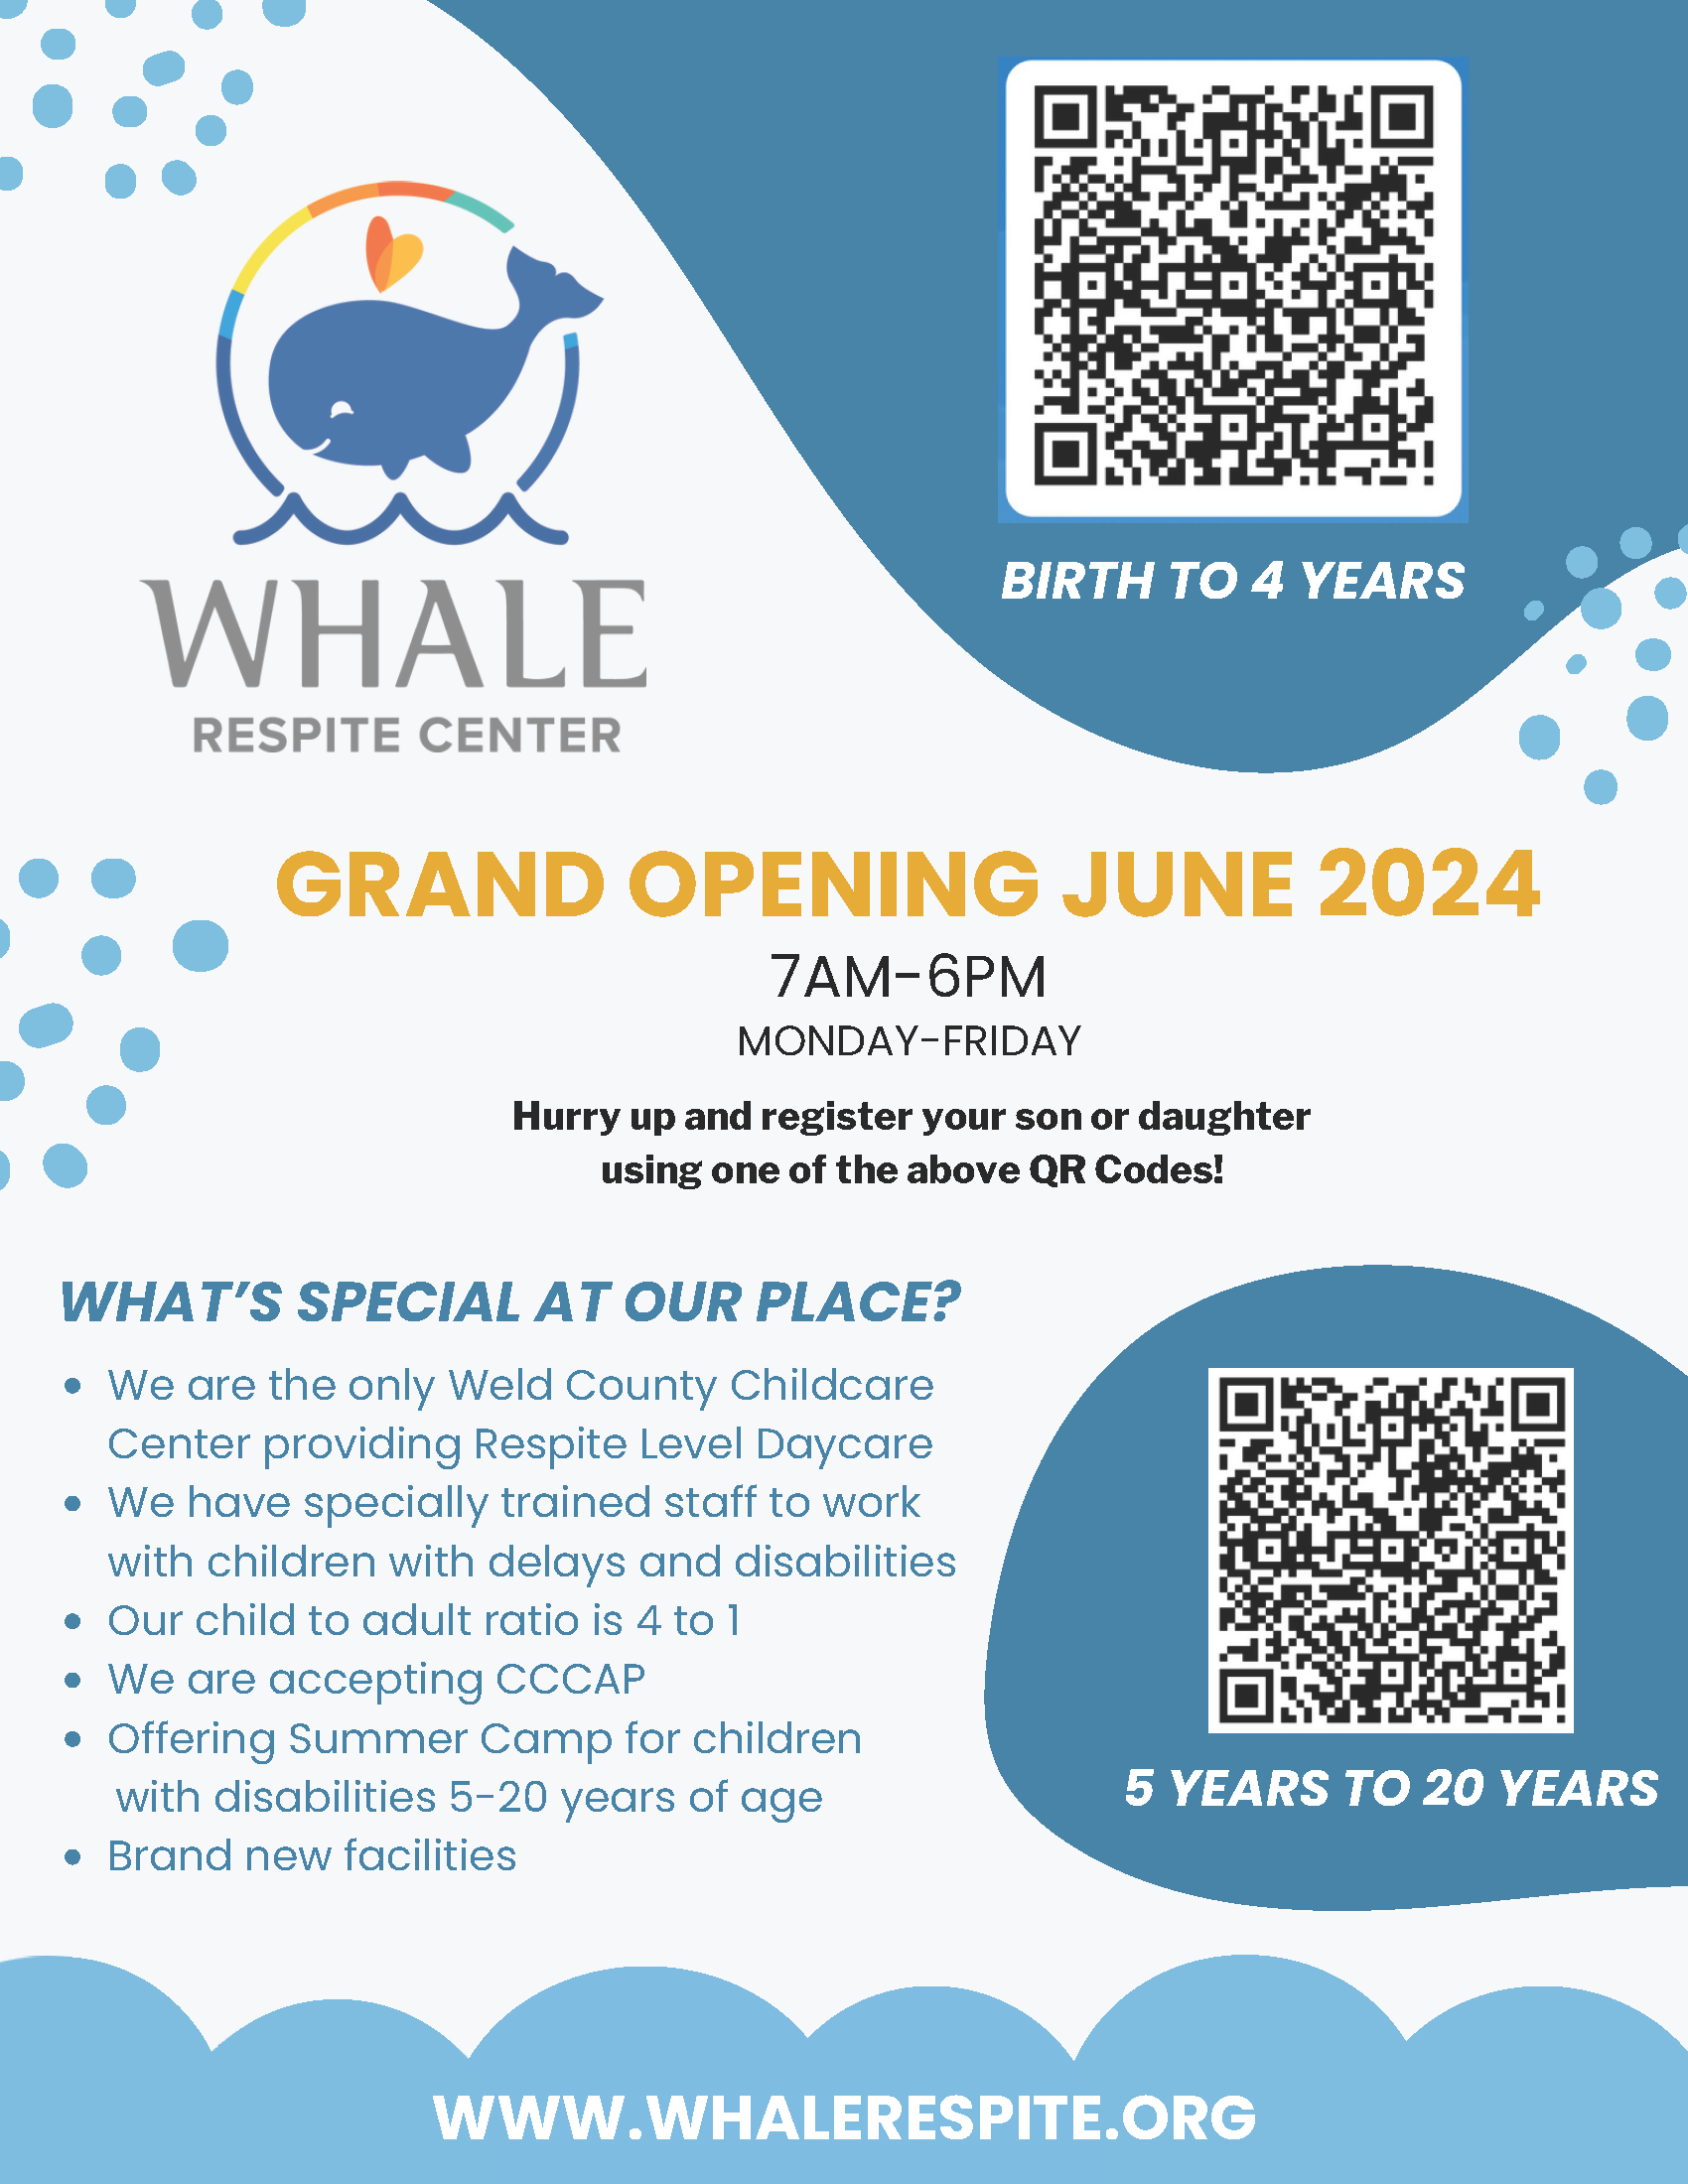 WHALE application flyer, featuring body text from article